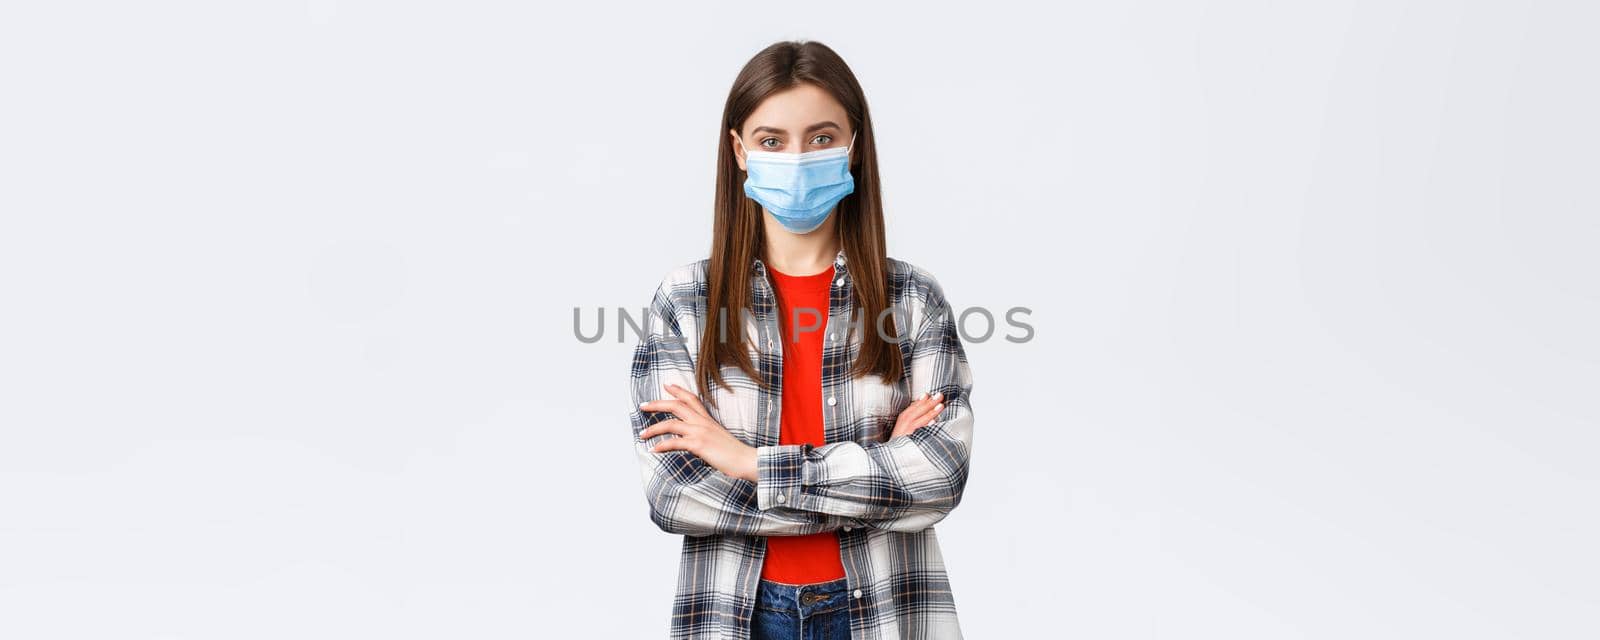 Coronavirus outbreak, leisure on quarantine, social distancing and emotions concept. Confident young woman in checked shirt wear medical mask, cross arms chest, determined look camera.